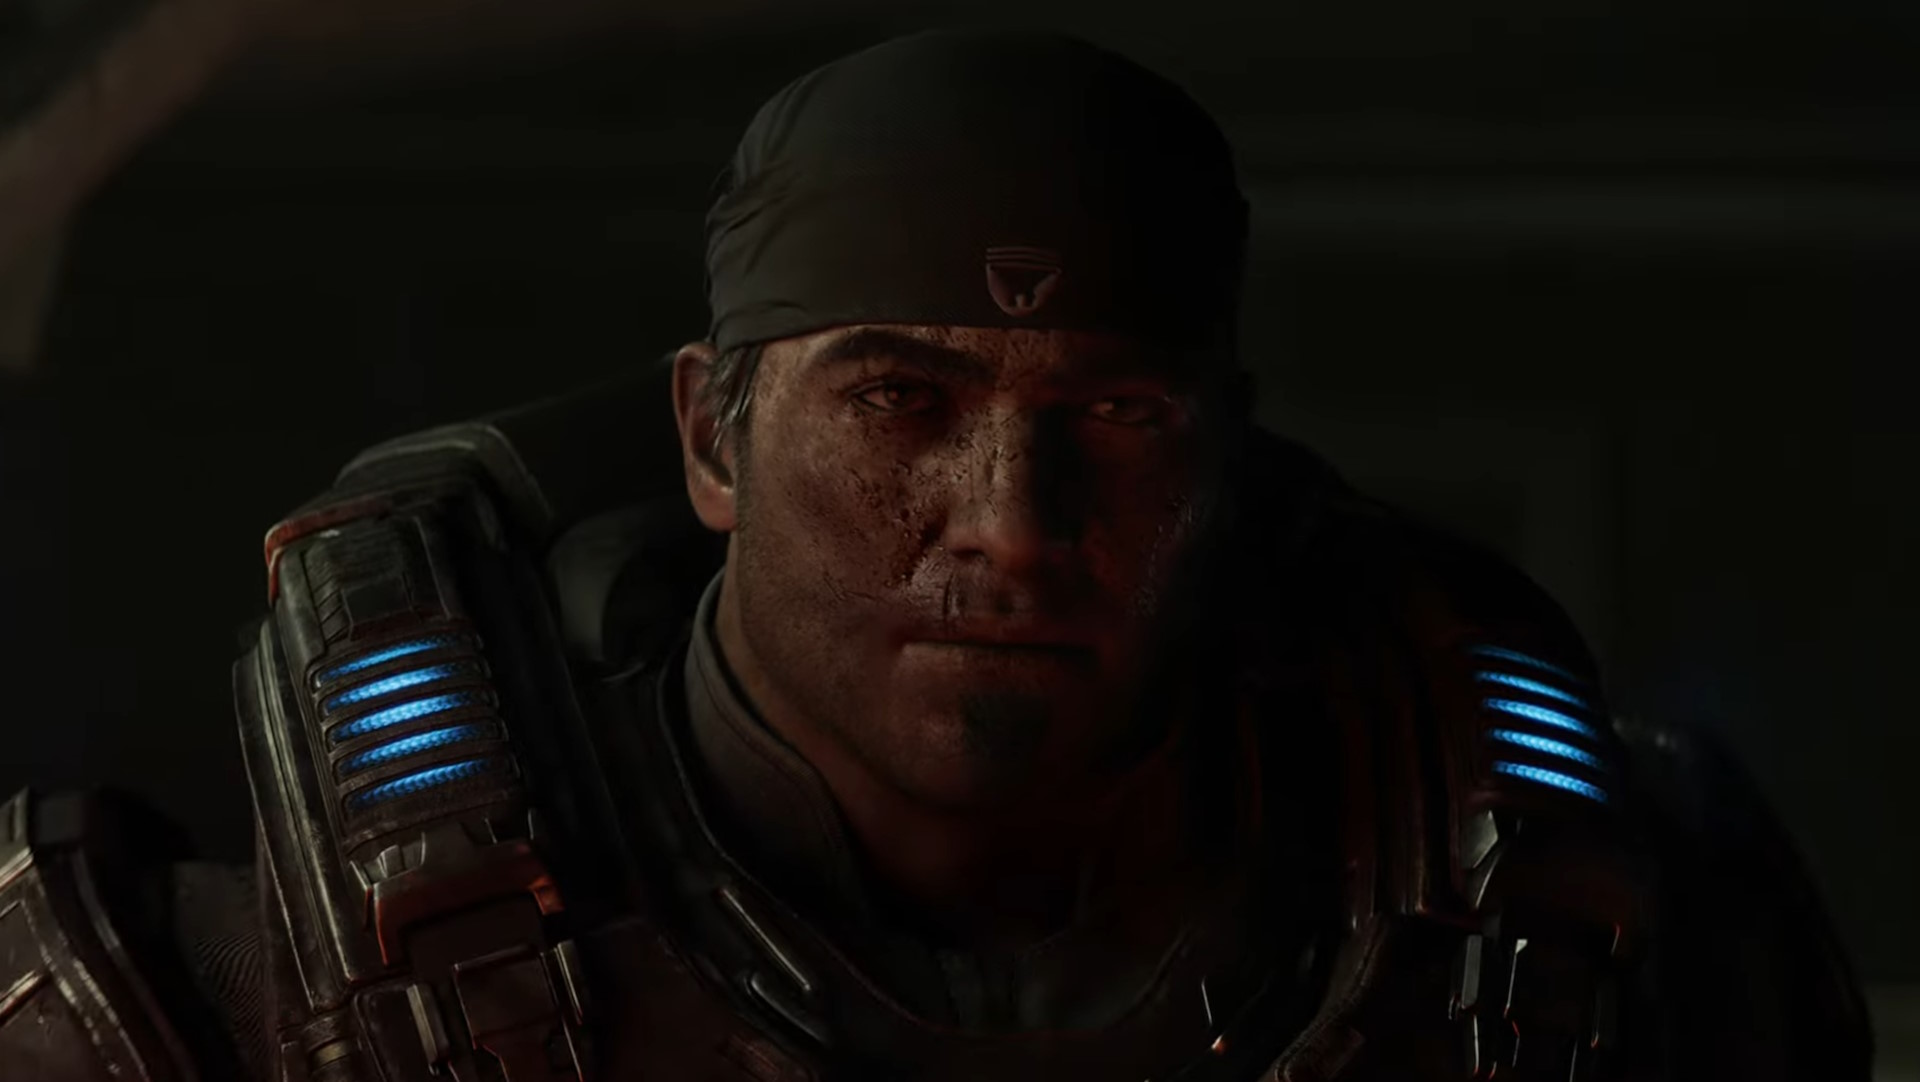  Gears of War is coming back with Marcus and Dom in an Emergence Day prequel 